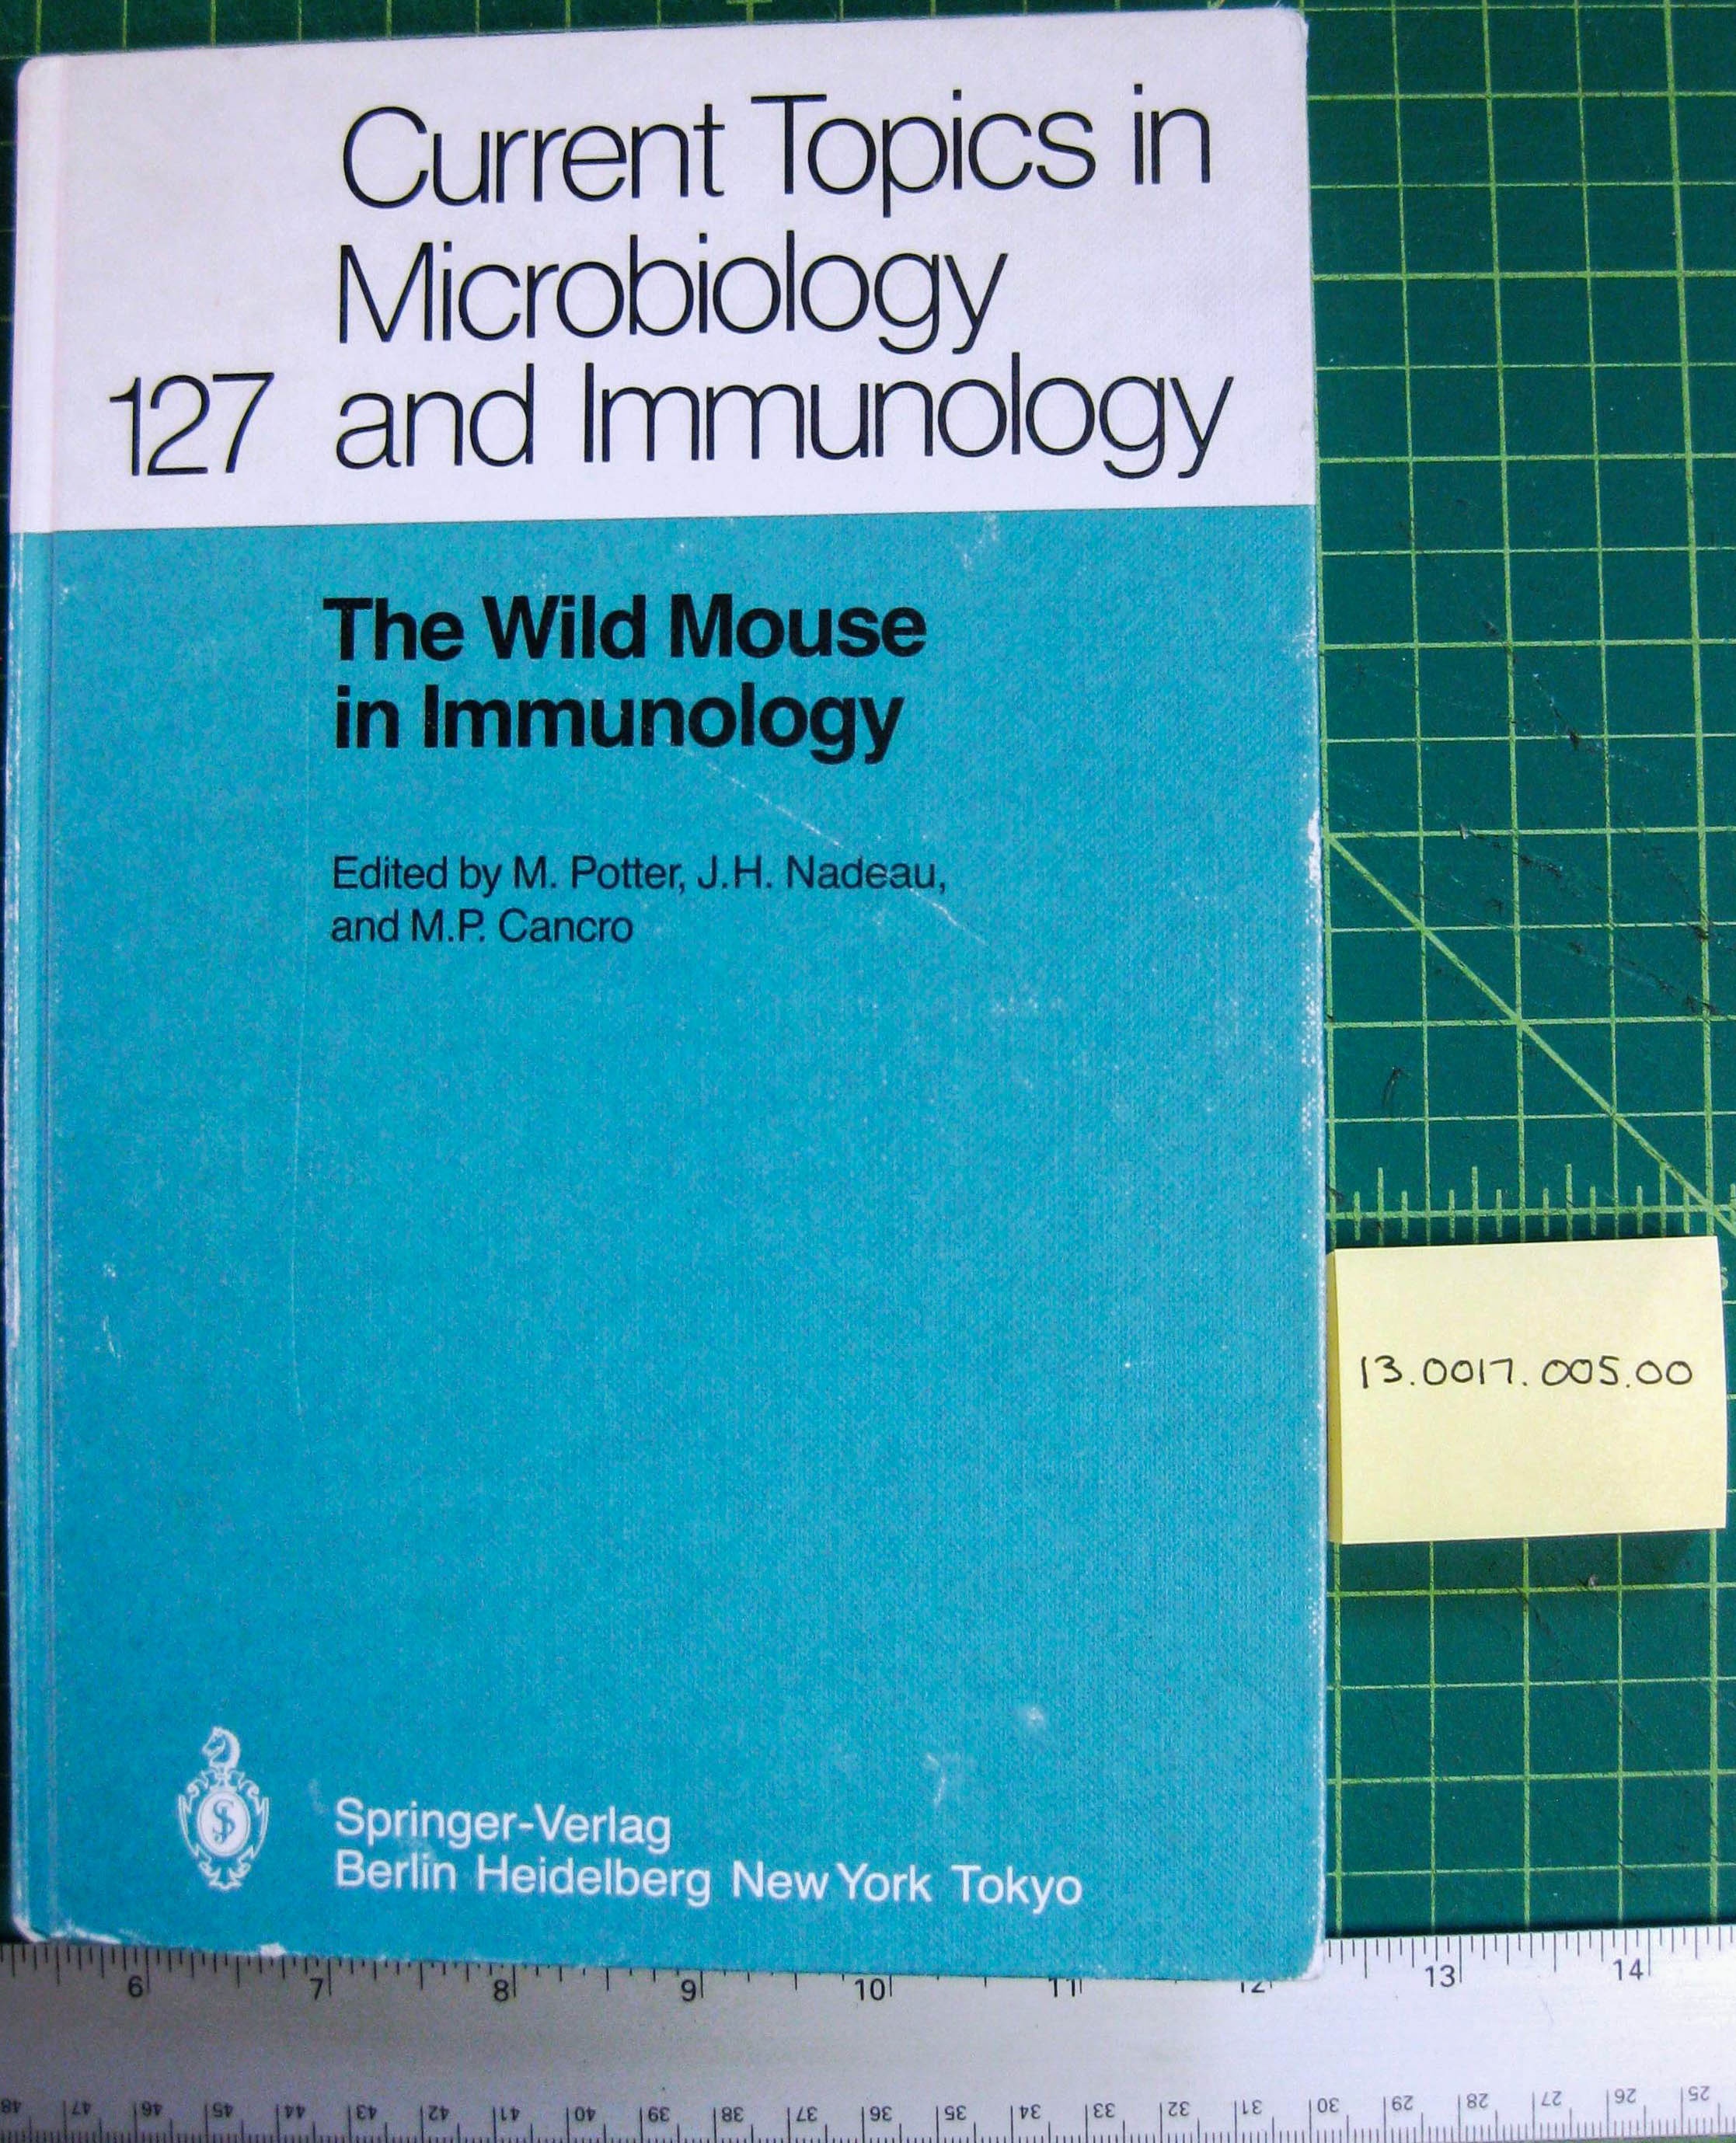 The Wild Mouse in Immunology book